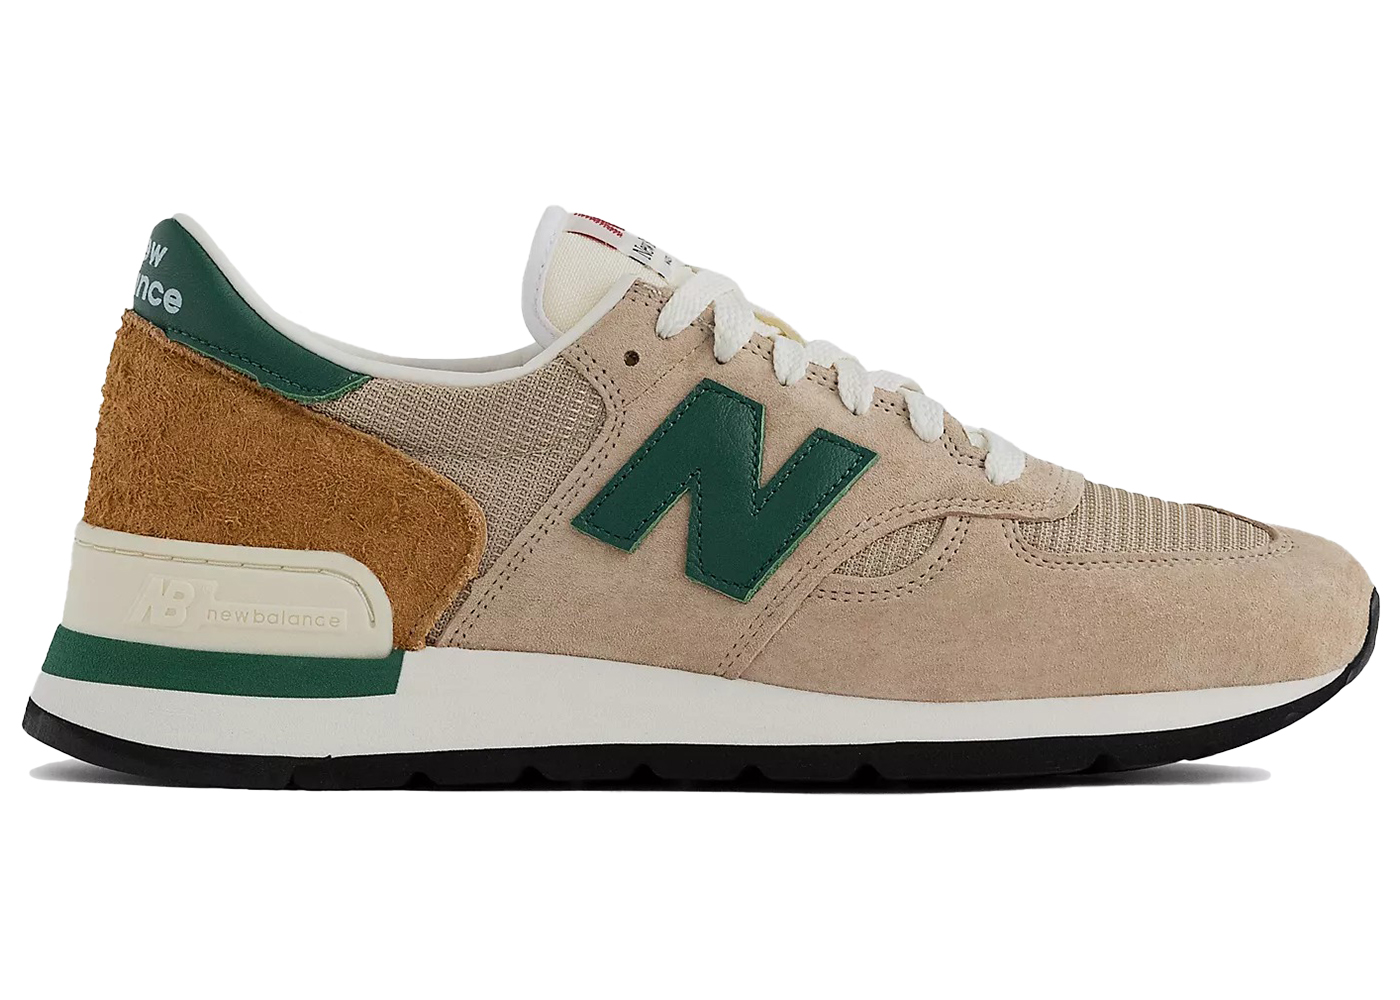 35.5, New Balance Hombre MADE in USA 990 in Marrón/Verde, New Balance SMF Gold SMF200DC